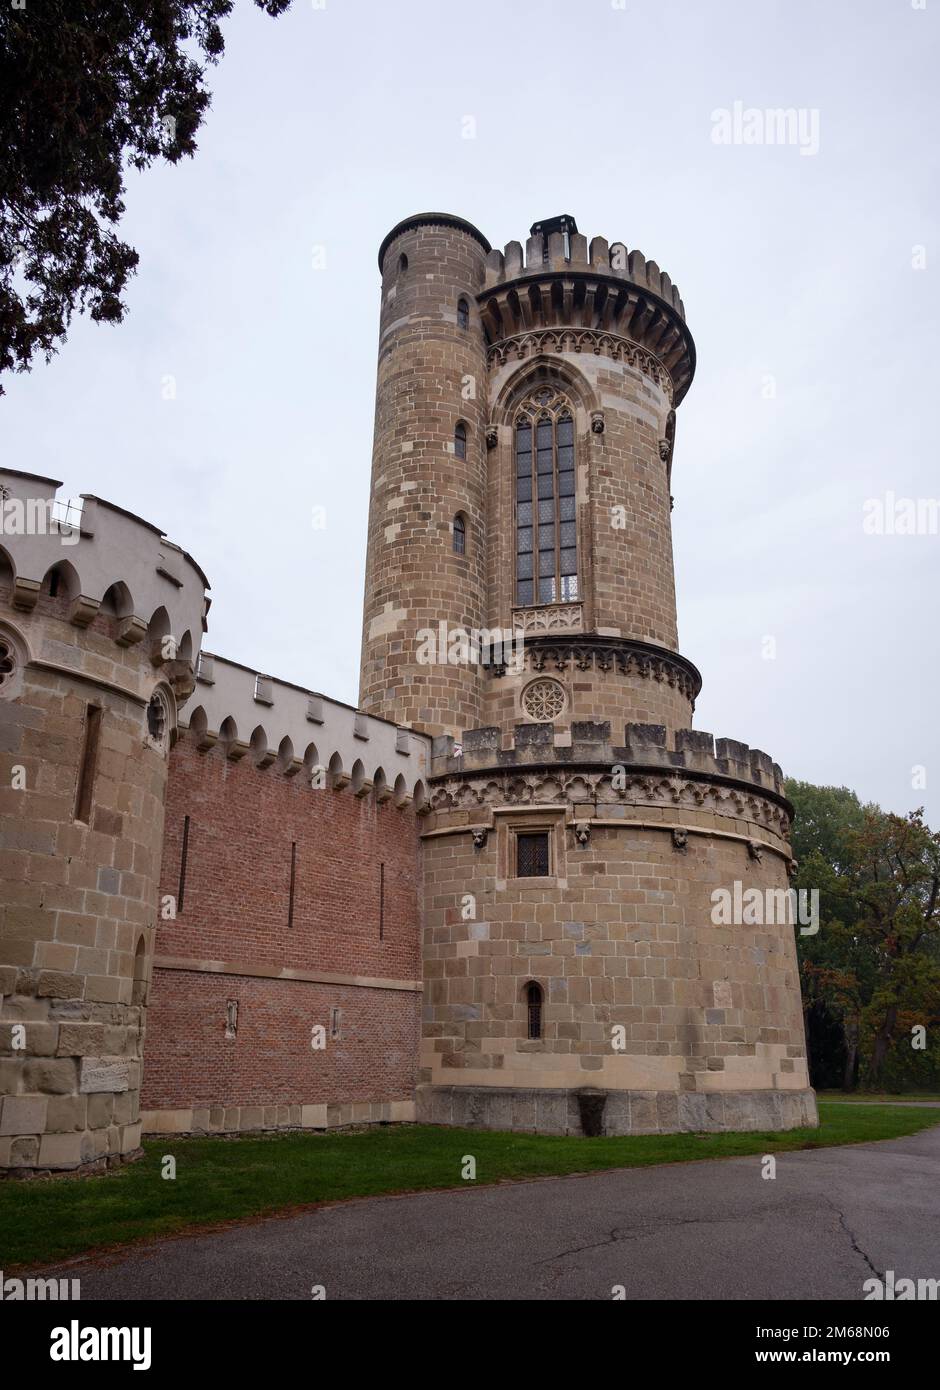 15th october,2022.View of the Laxenburg castle at the town of Laxenburg, Austria. Stock Photo